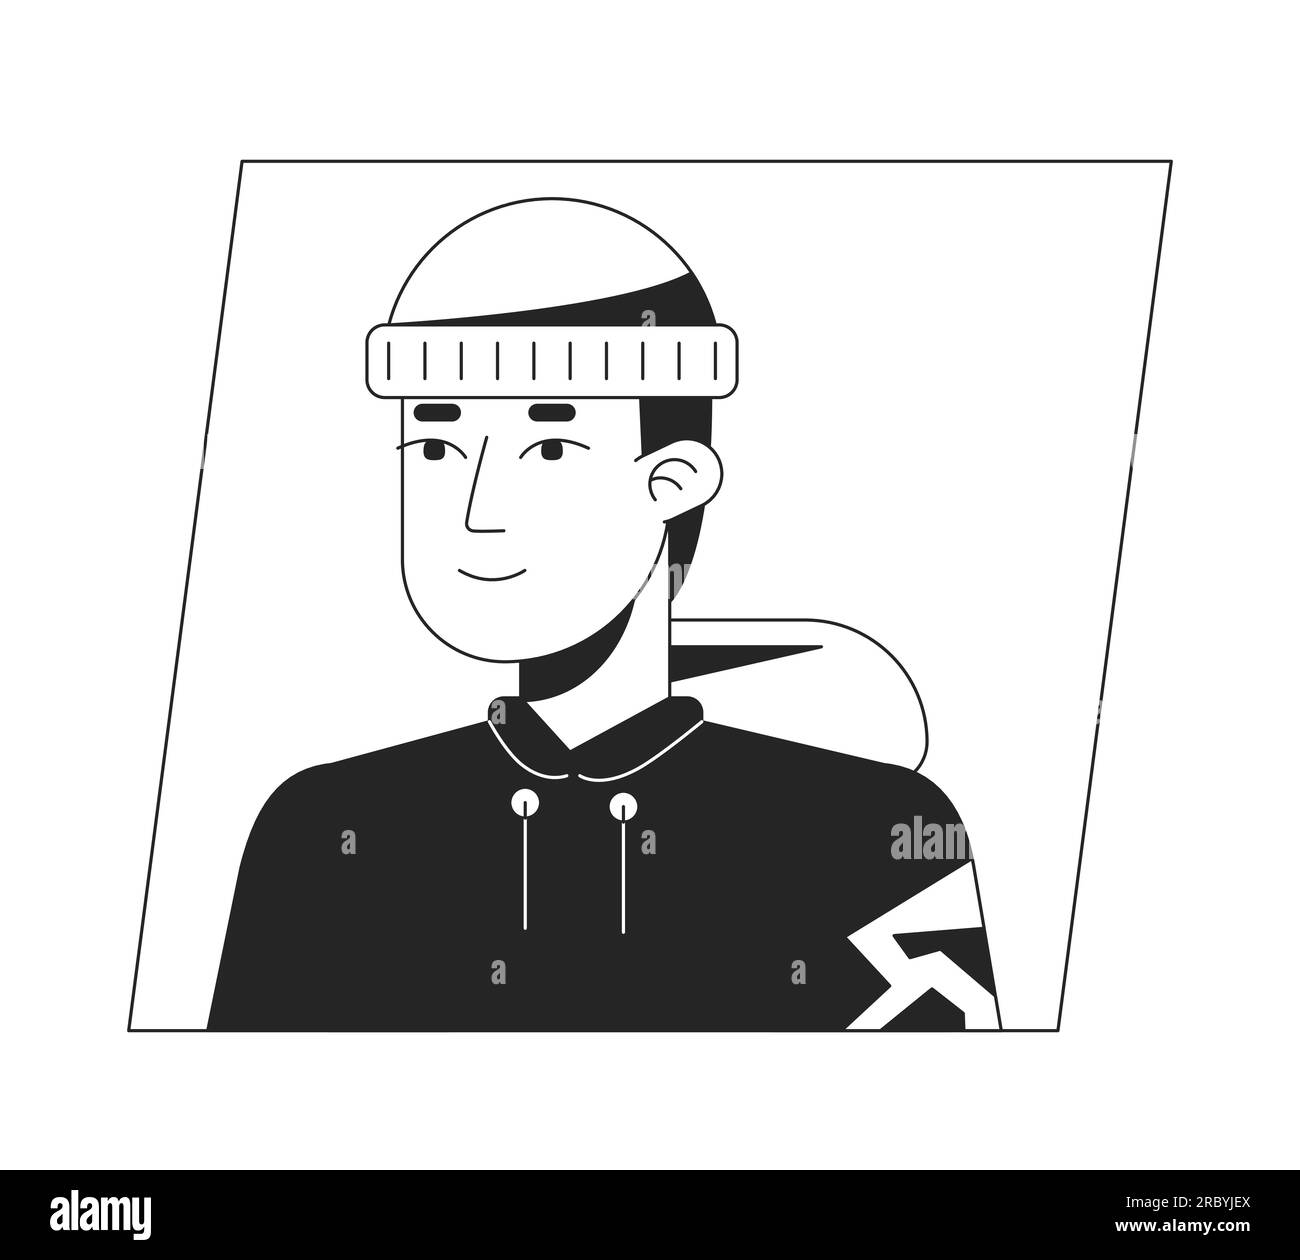 Teenager in hat and hoodie black white cartoon avatar icon Stock Vector